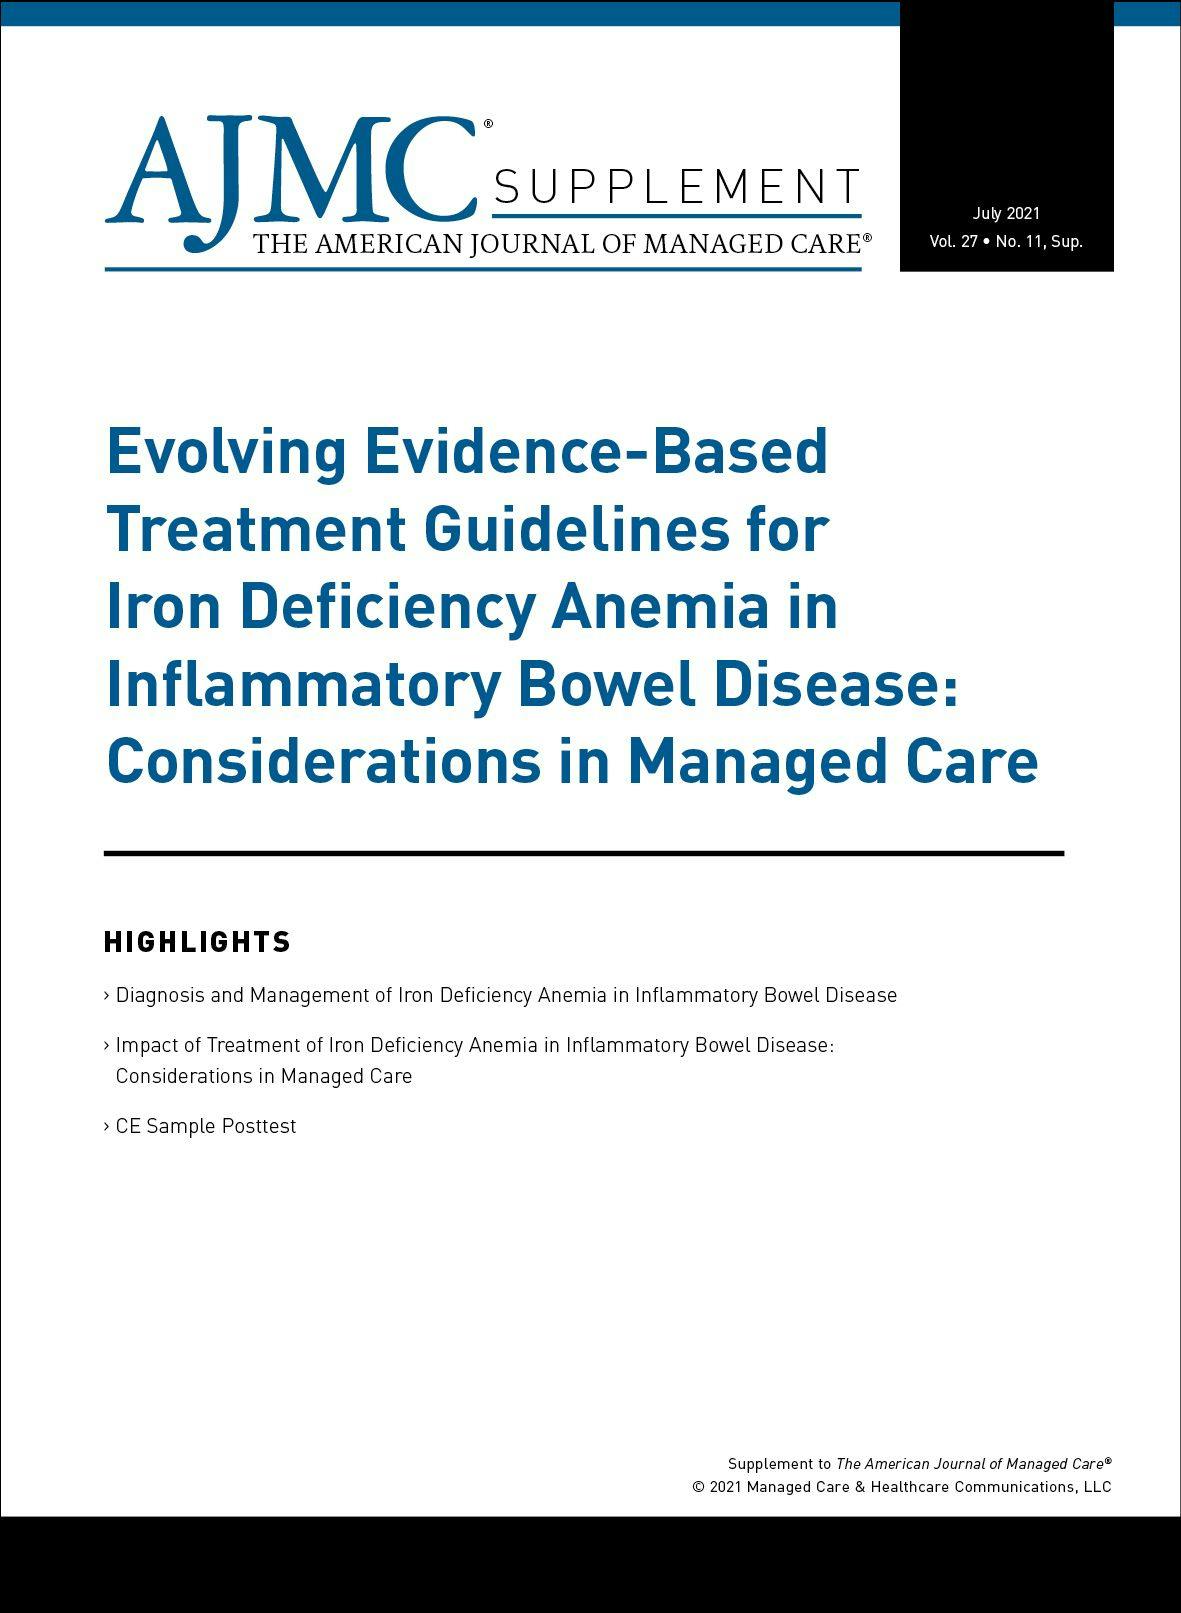 Evolving Evidence-Based Treatment Guidelines for Iron Deficiency Anemia in Inflammatory Bowel Disease: Considerations in Managed Care